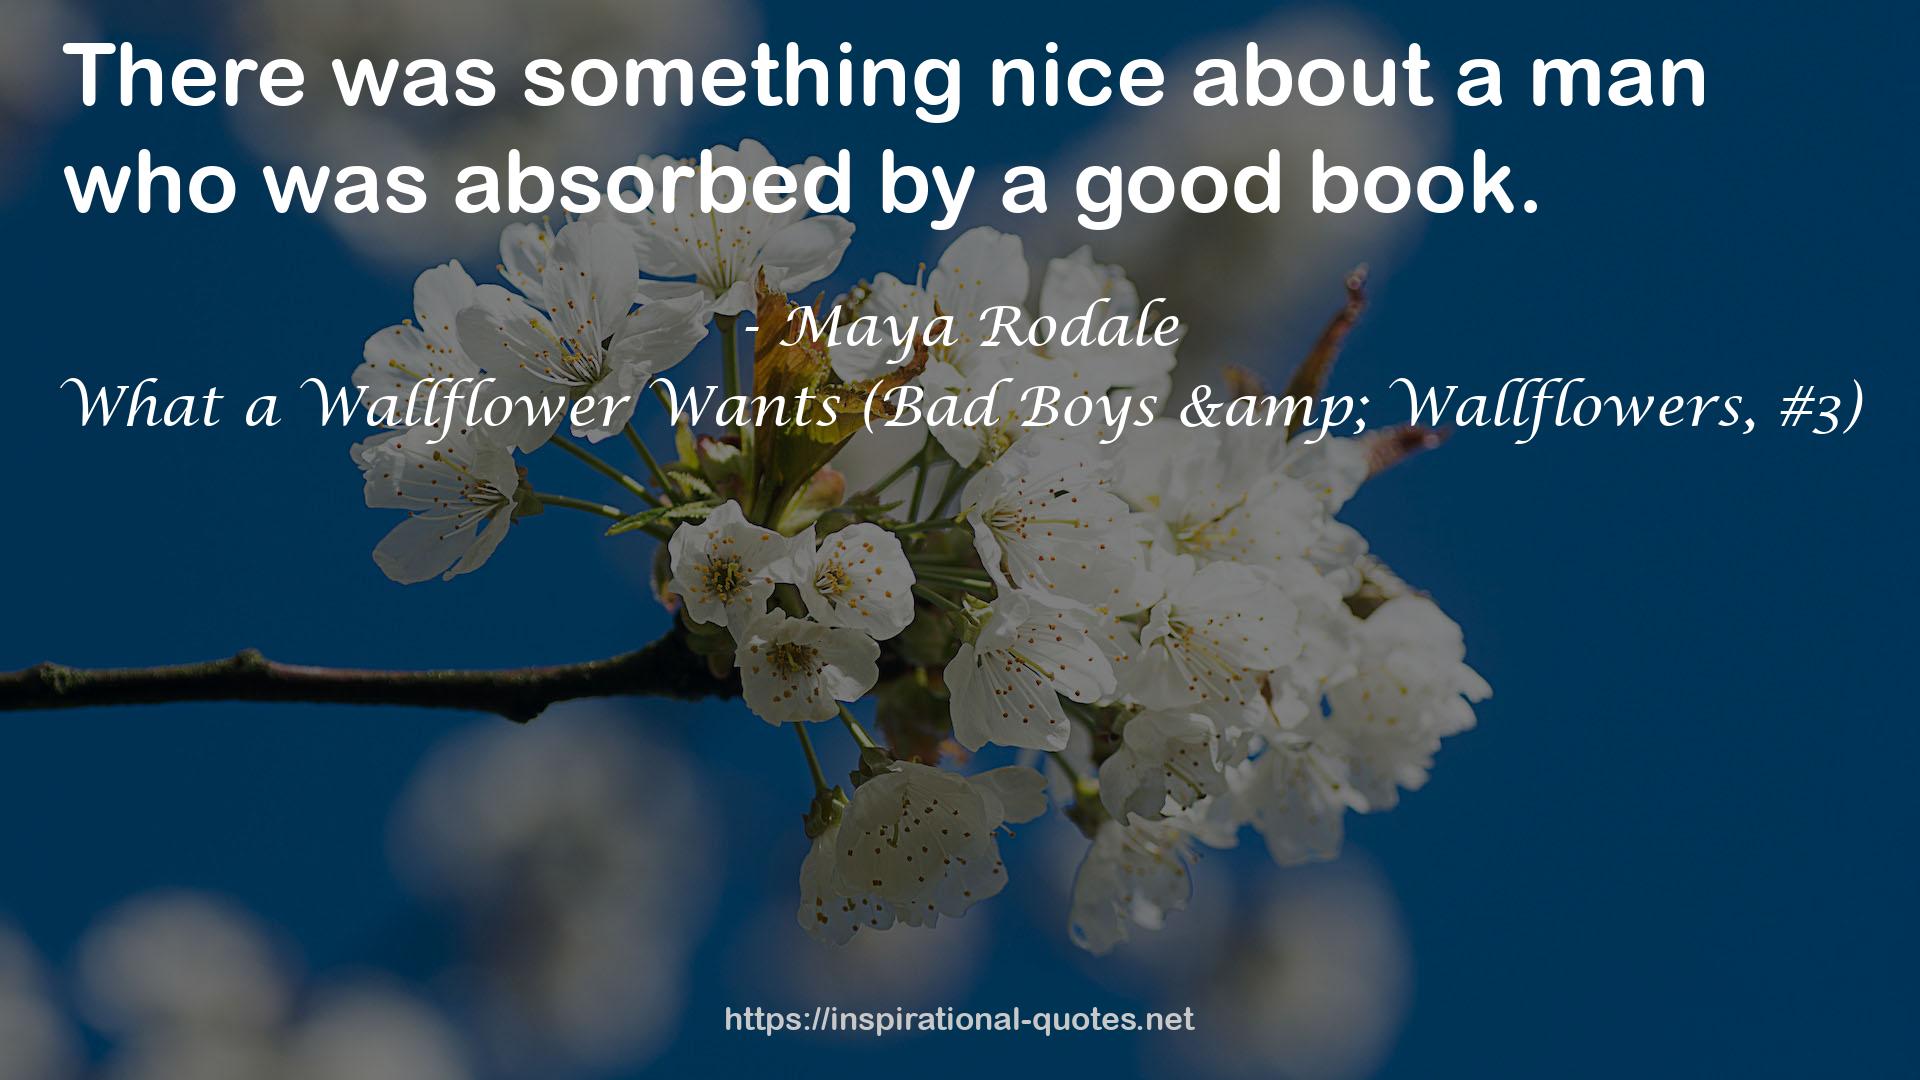 What a Wallflower Wants (Bad Boys & Wallflowers, #3) QUOTES